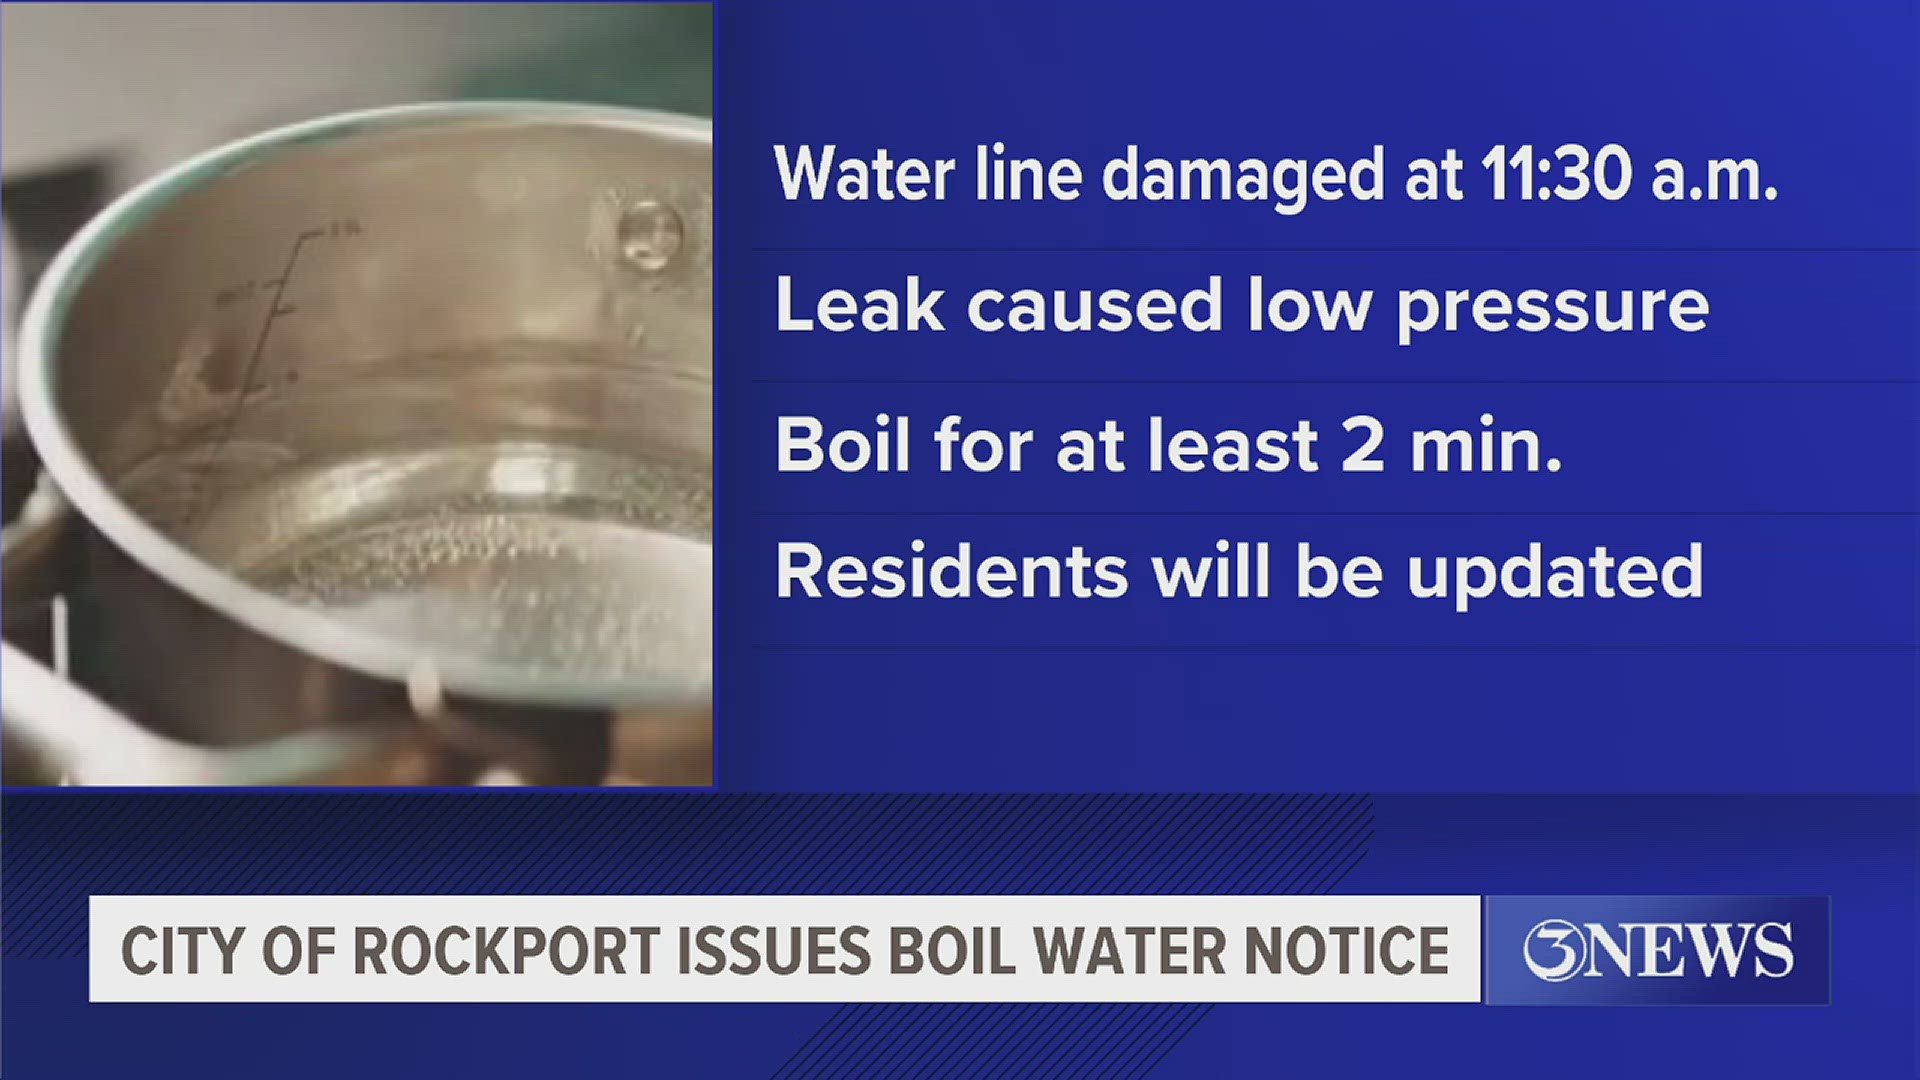 A water-line leak and subsequent low pressure is the reason for the boil notice.